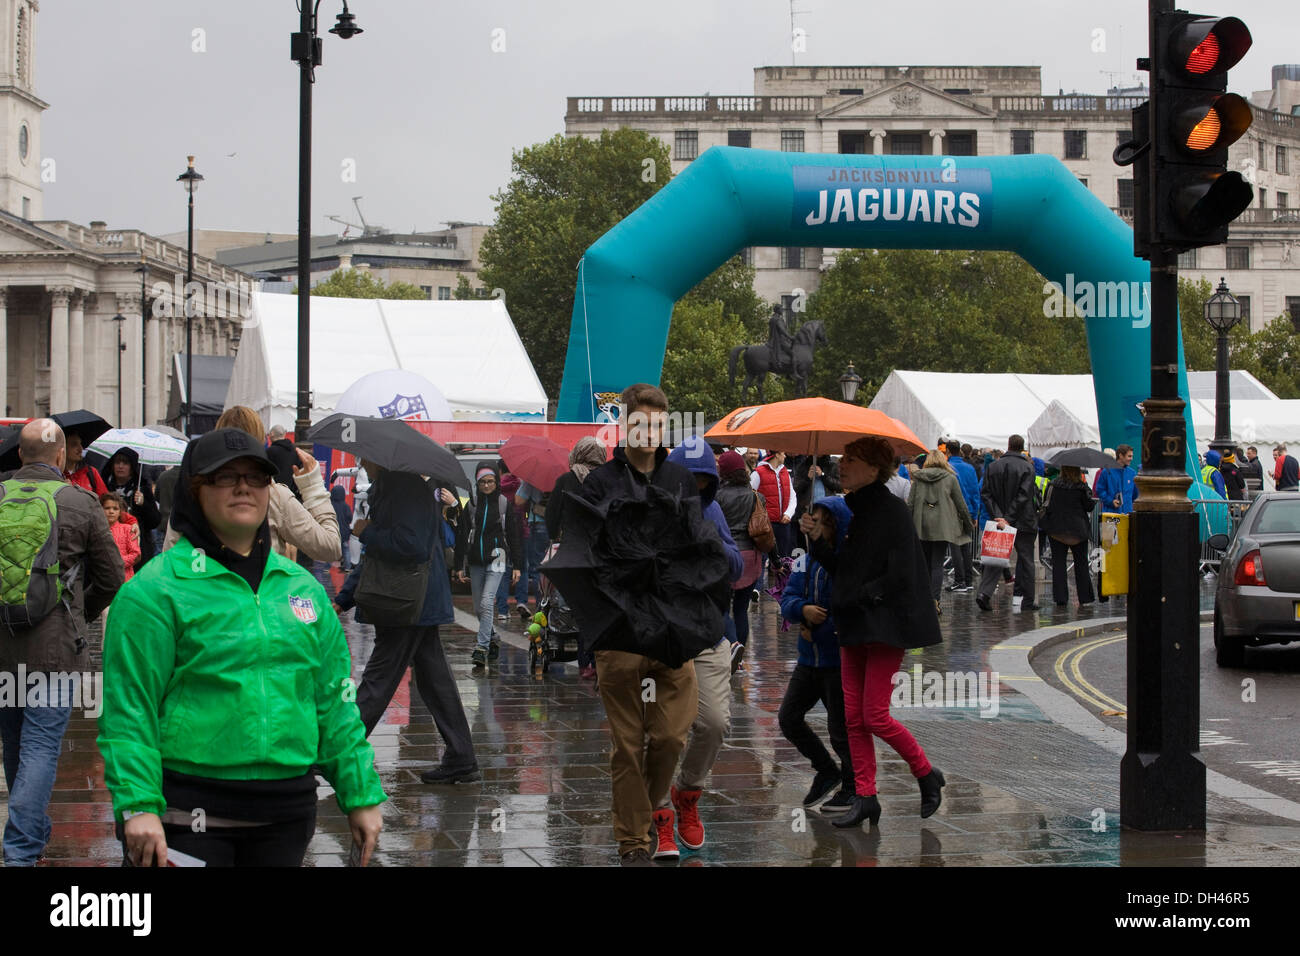 Crowds Gather in the rain for the NFL Jacksonville Jaguars Display in Trafalgar Square London England 'NFL Comes to London' Stock Photo